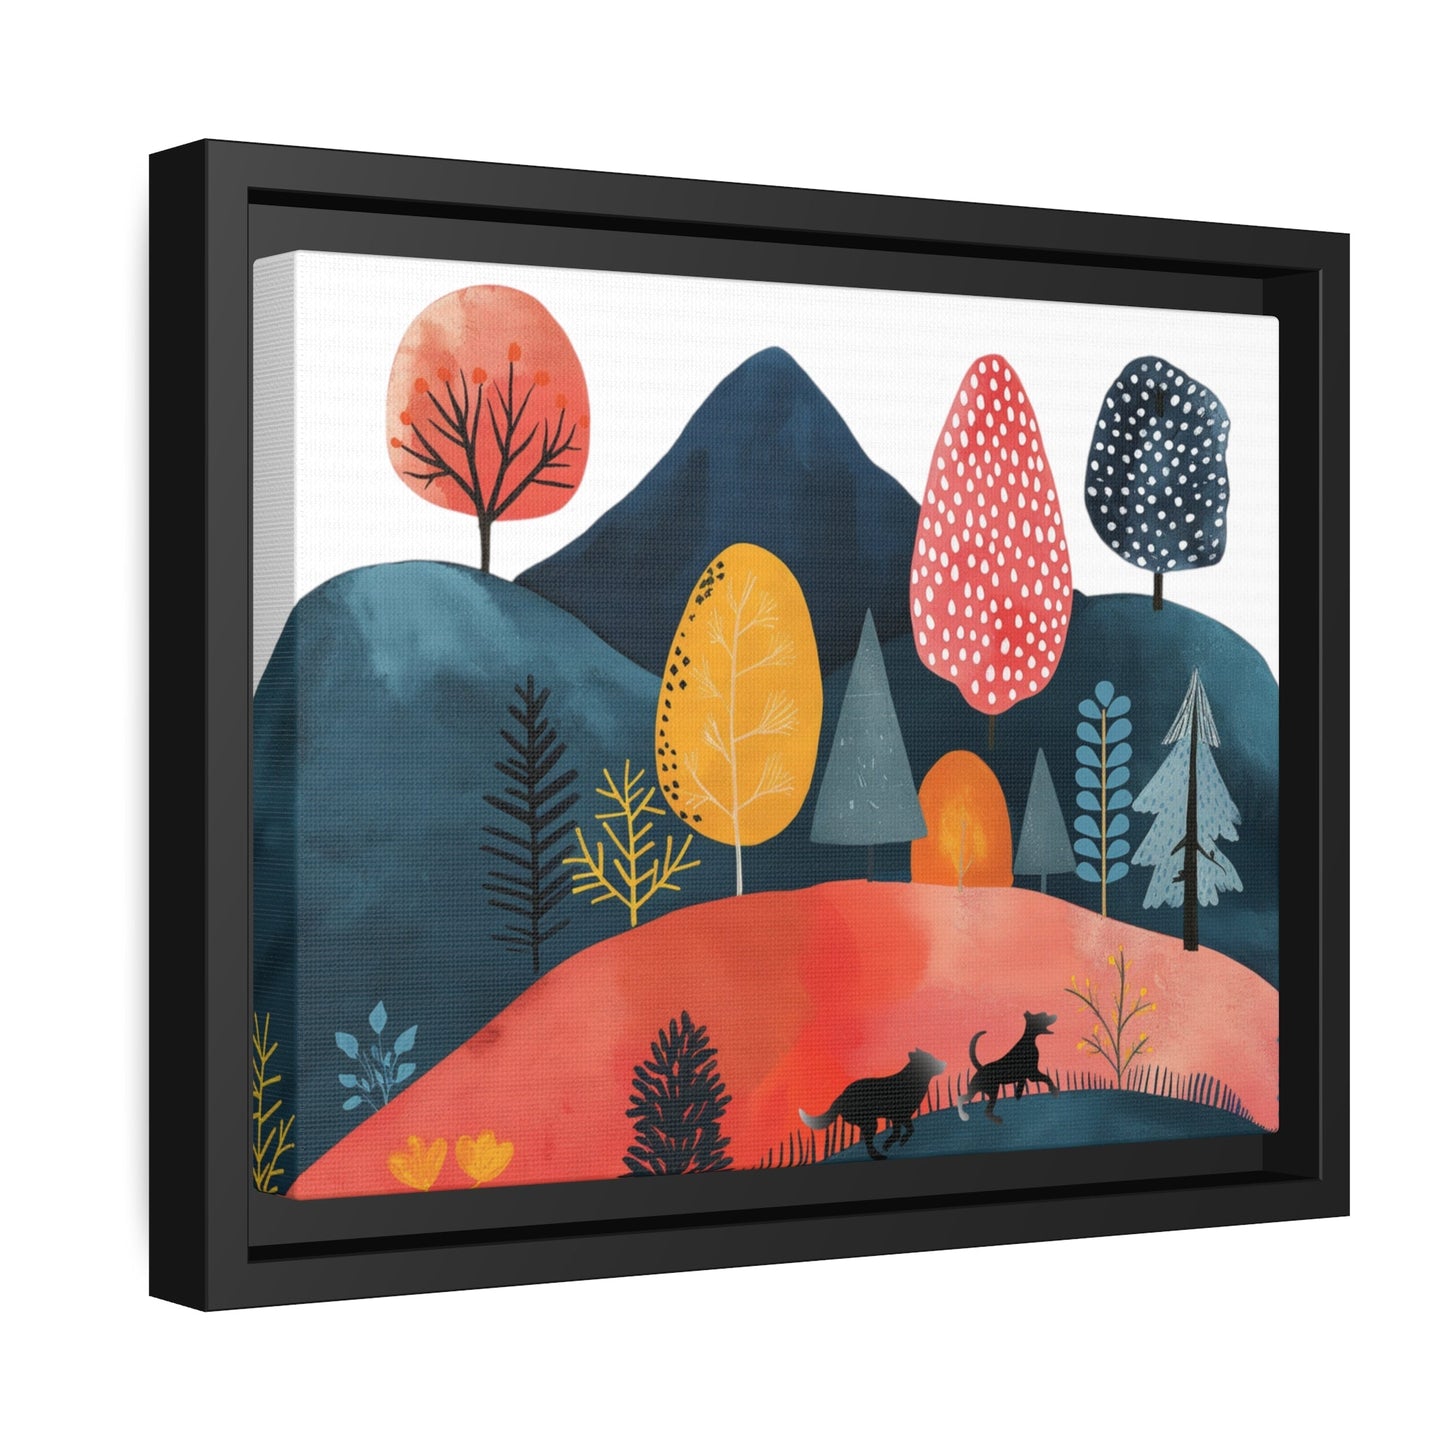 Matte Black Canvas Picture Frame featuring Cottage Core Style Dogs Running Free Design - Hobbster